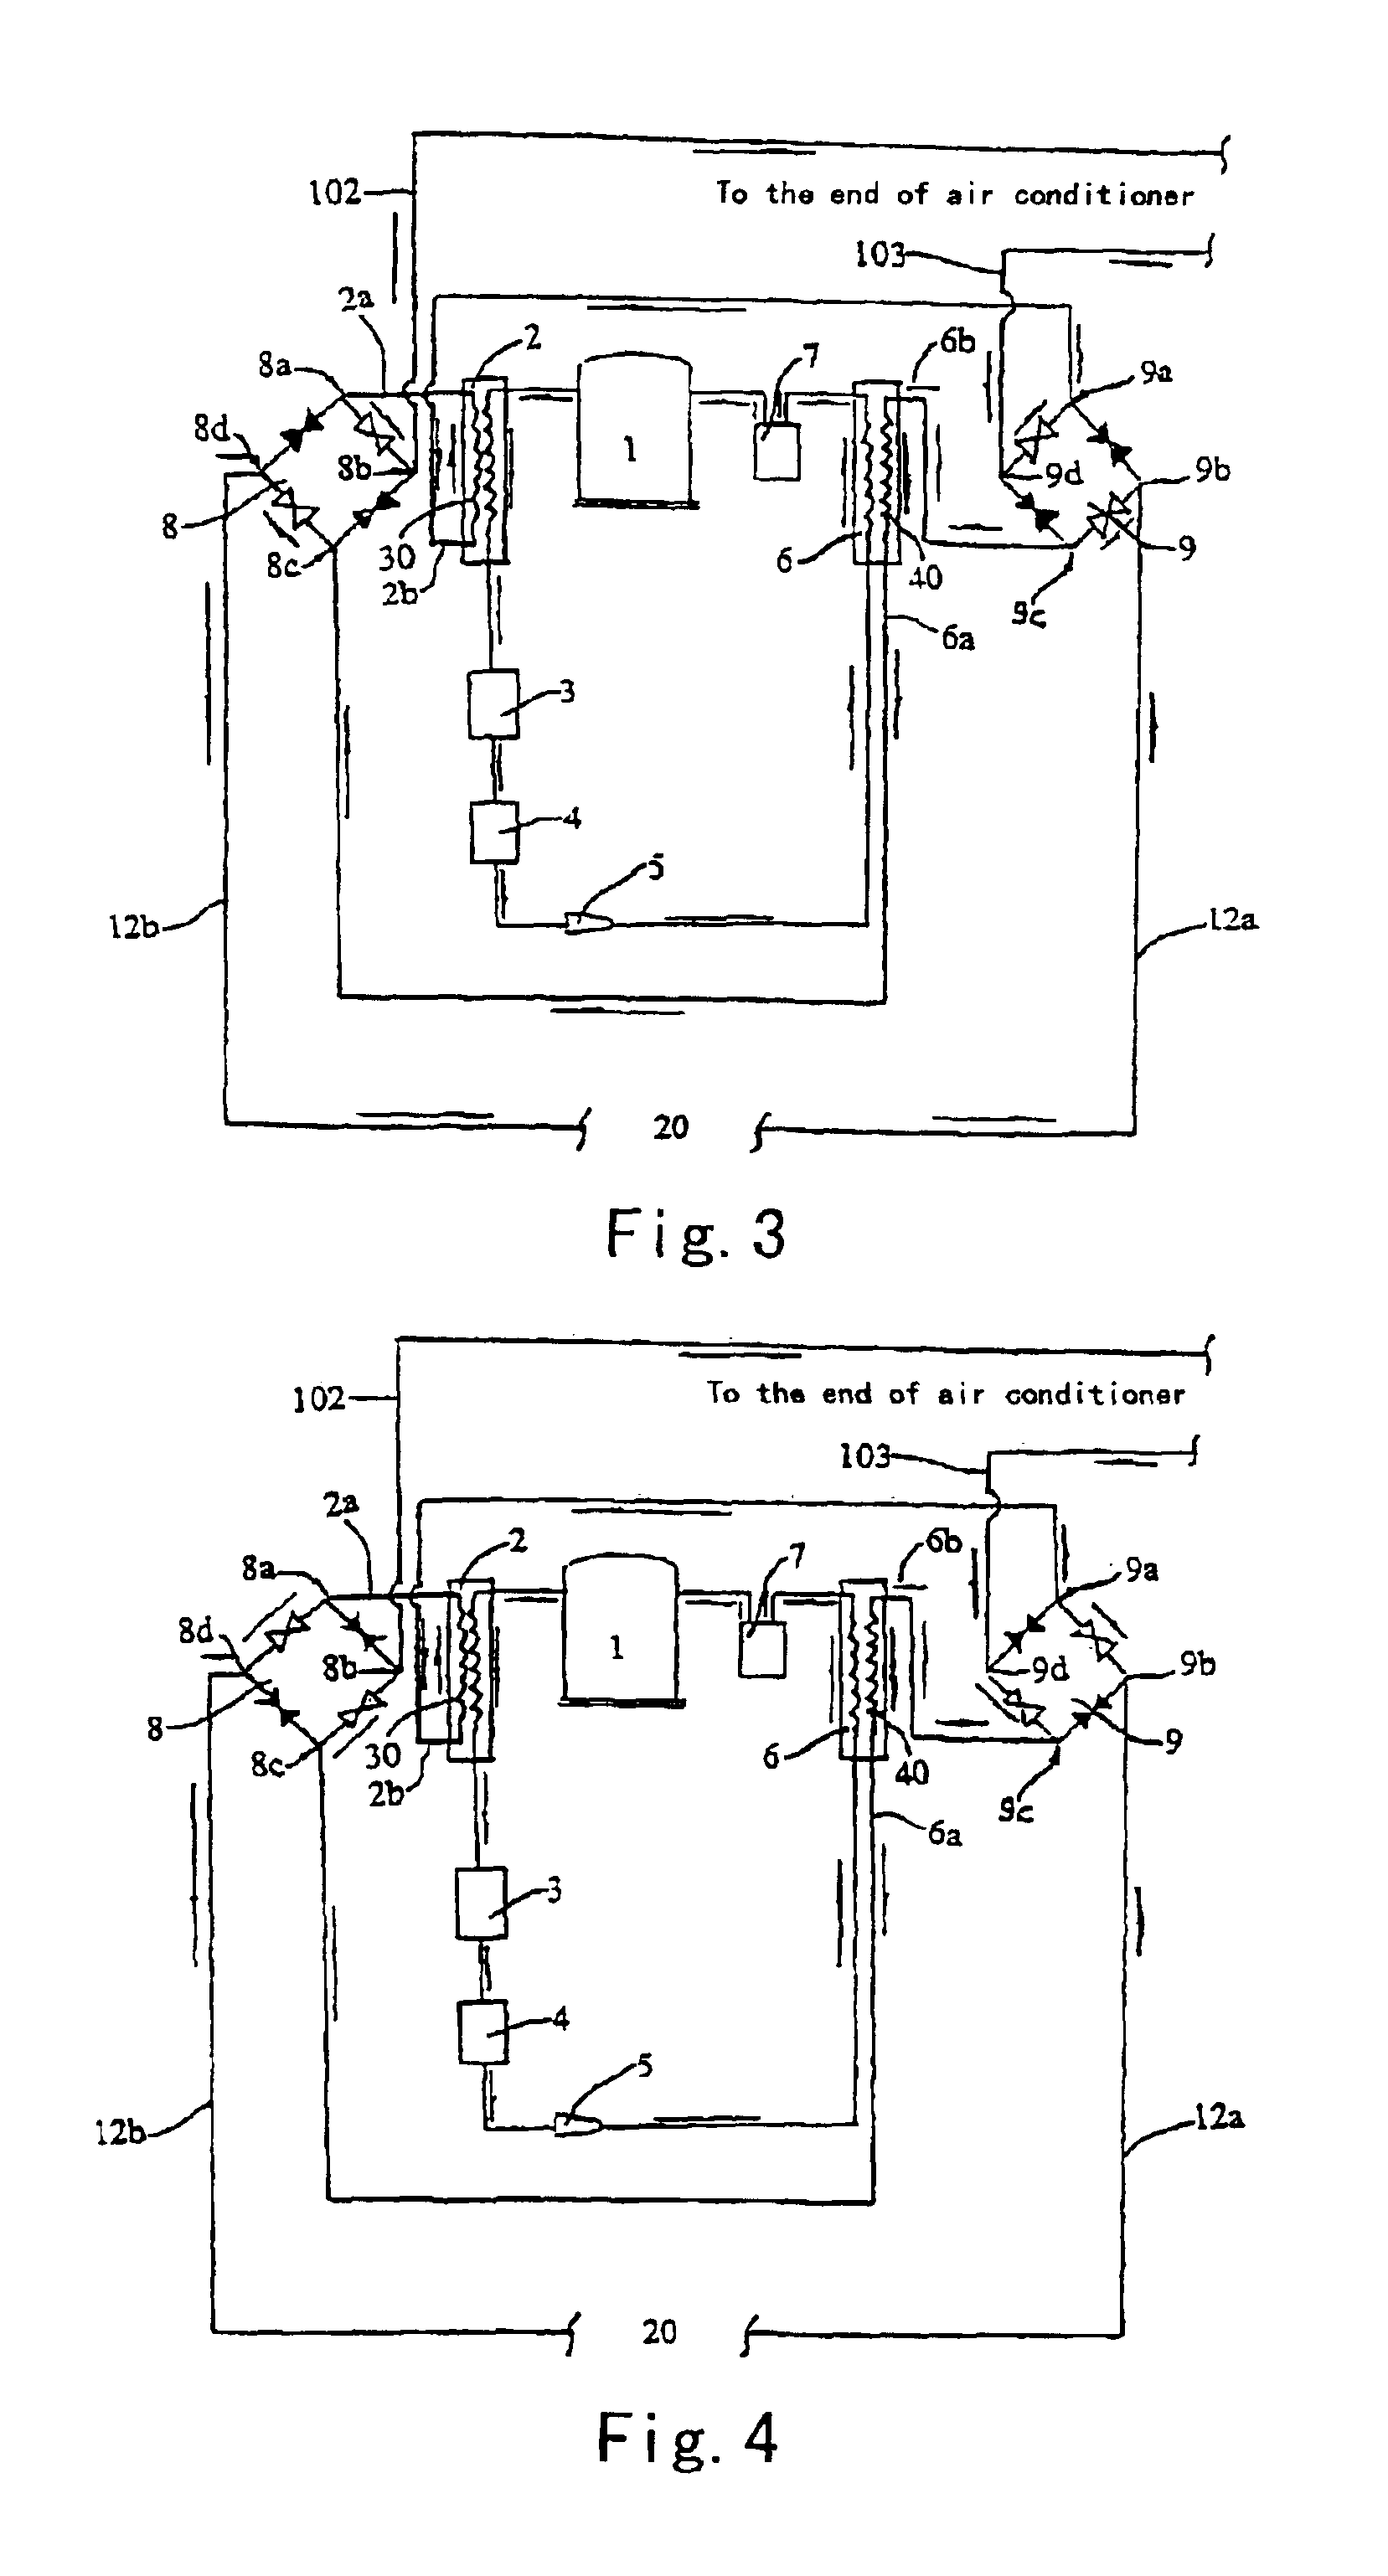 Well-water-type liquid cooling and heating resource system